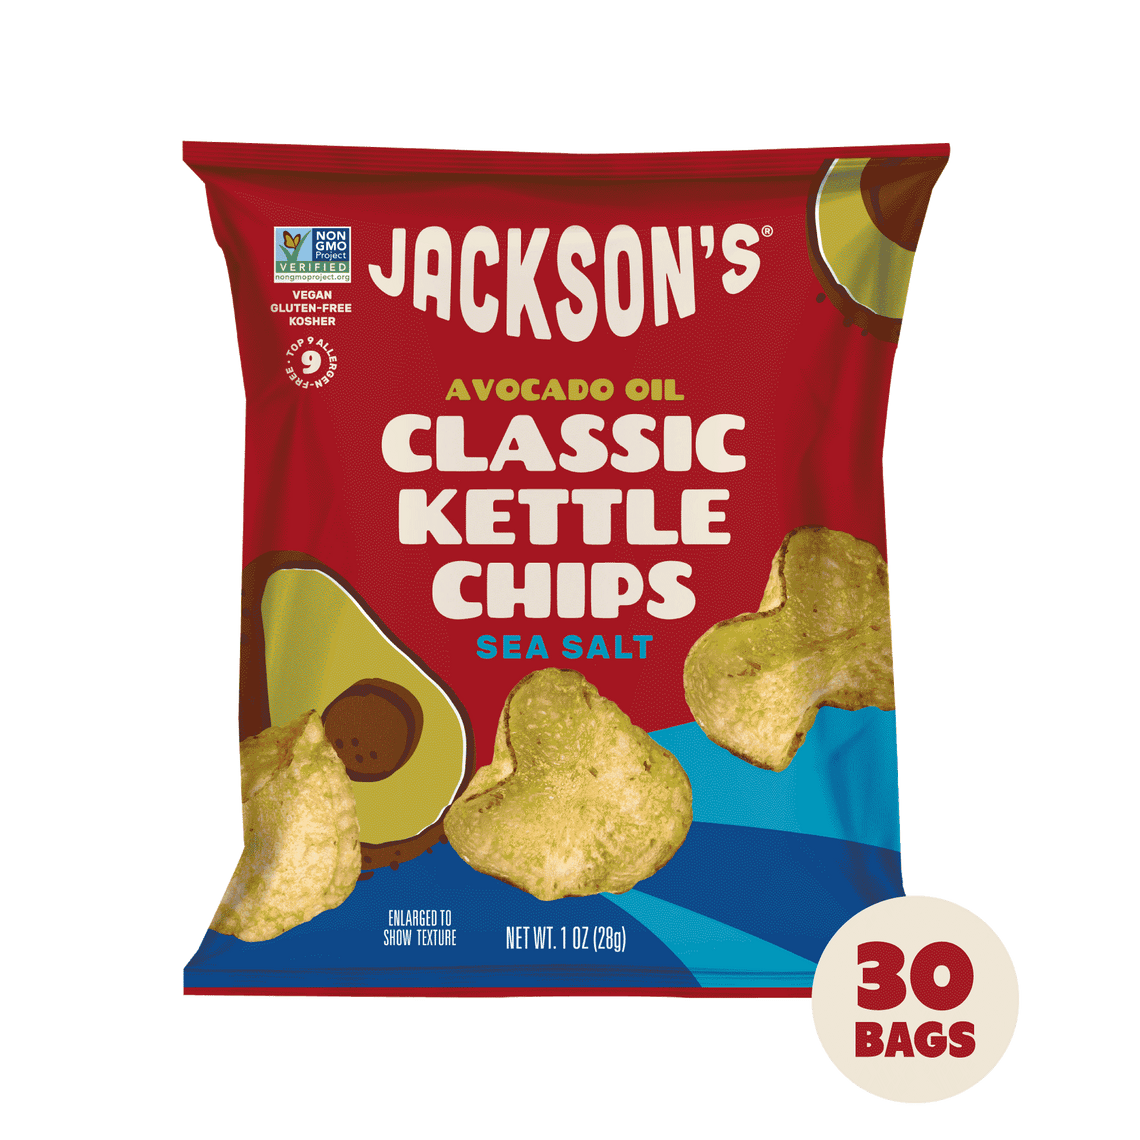 Jackson's Classic Kettle Chips Sea Salt flavor, 30 pack of 1oz bags, snack size bags, cooked in premium avocado oil, Kettle Cooked Potato Chips. 